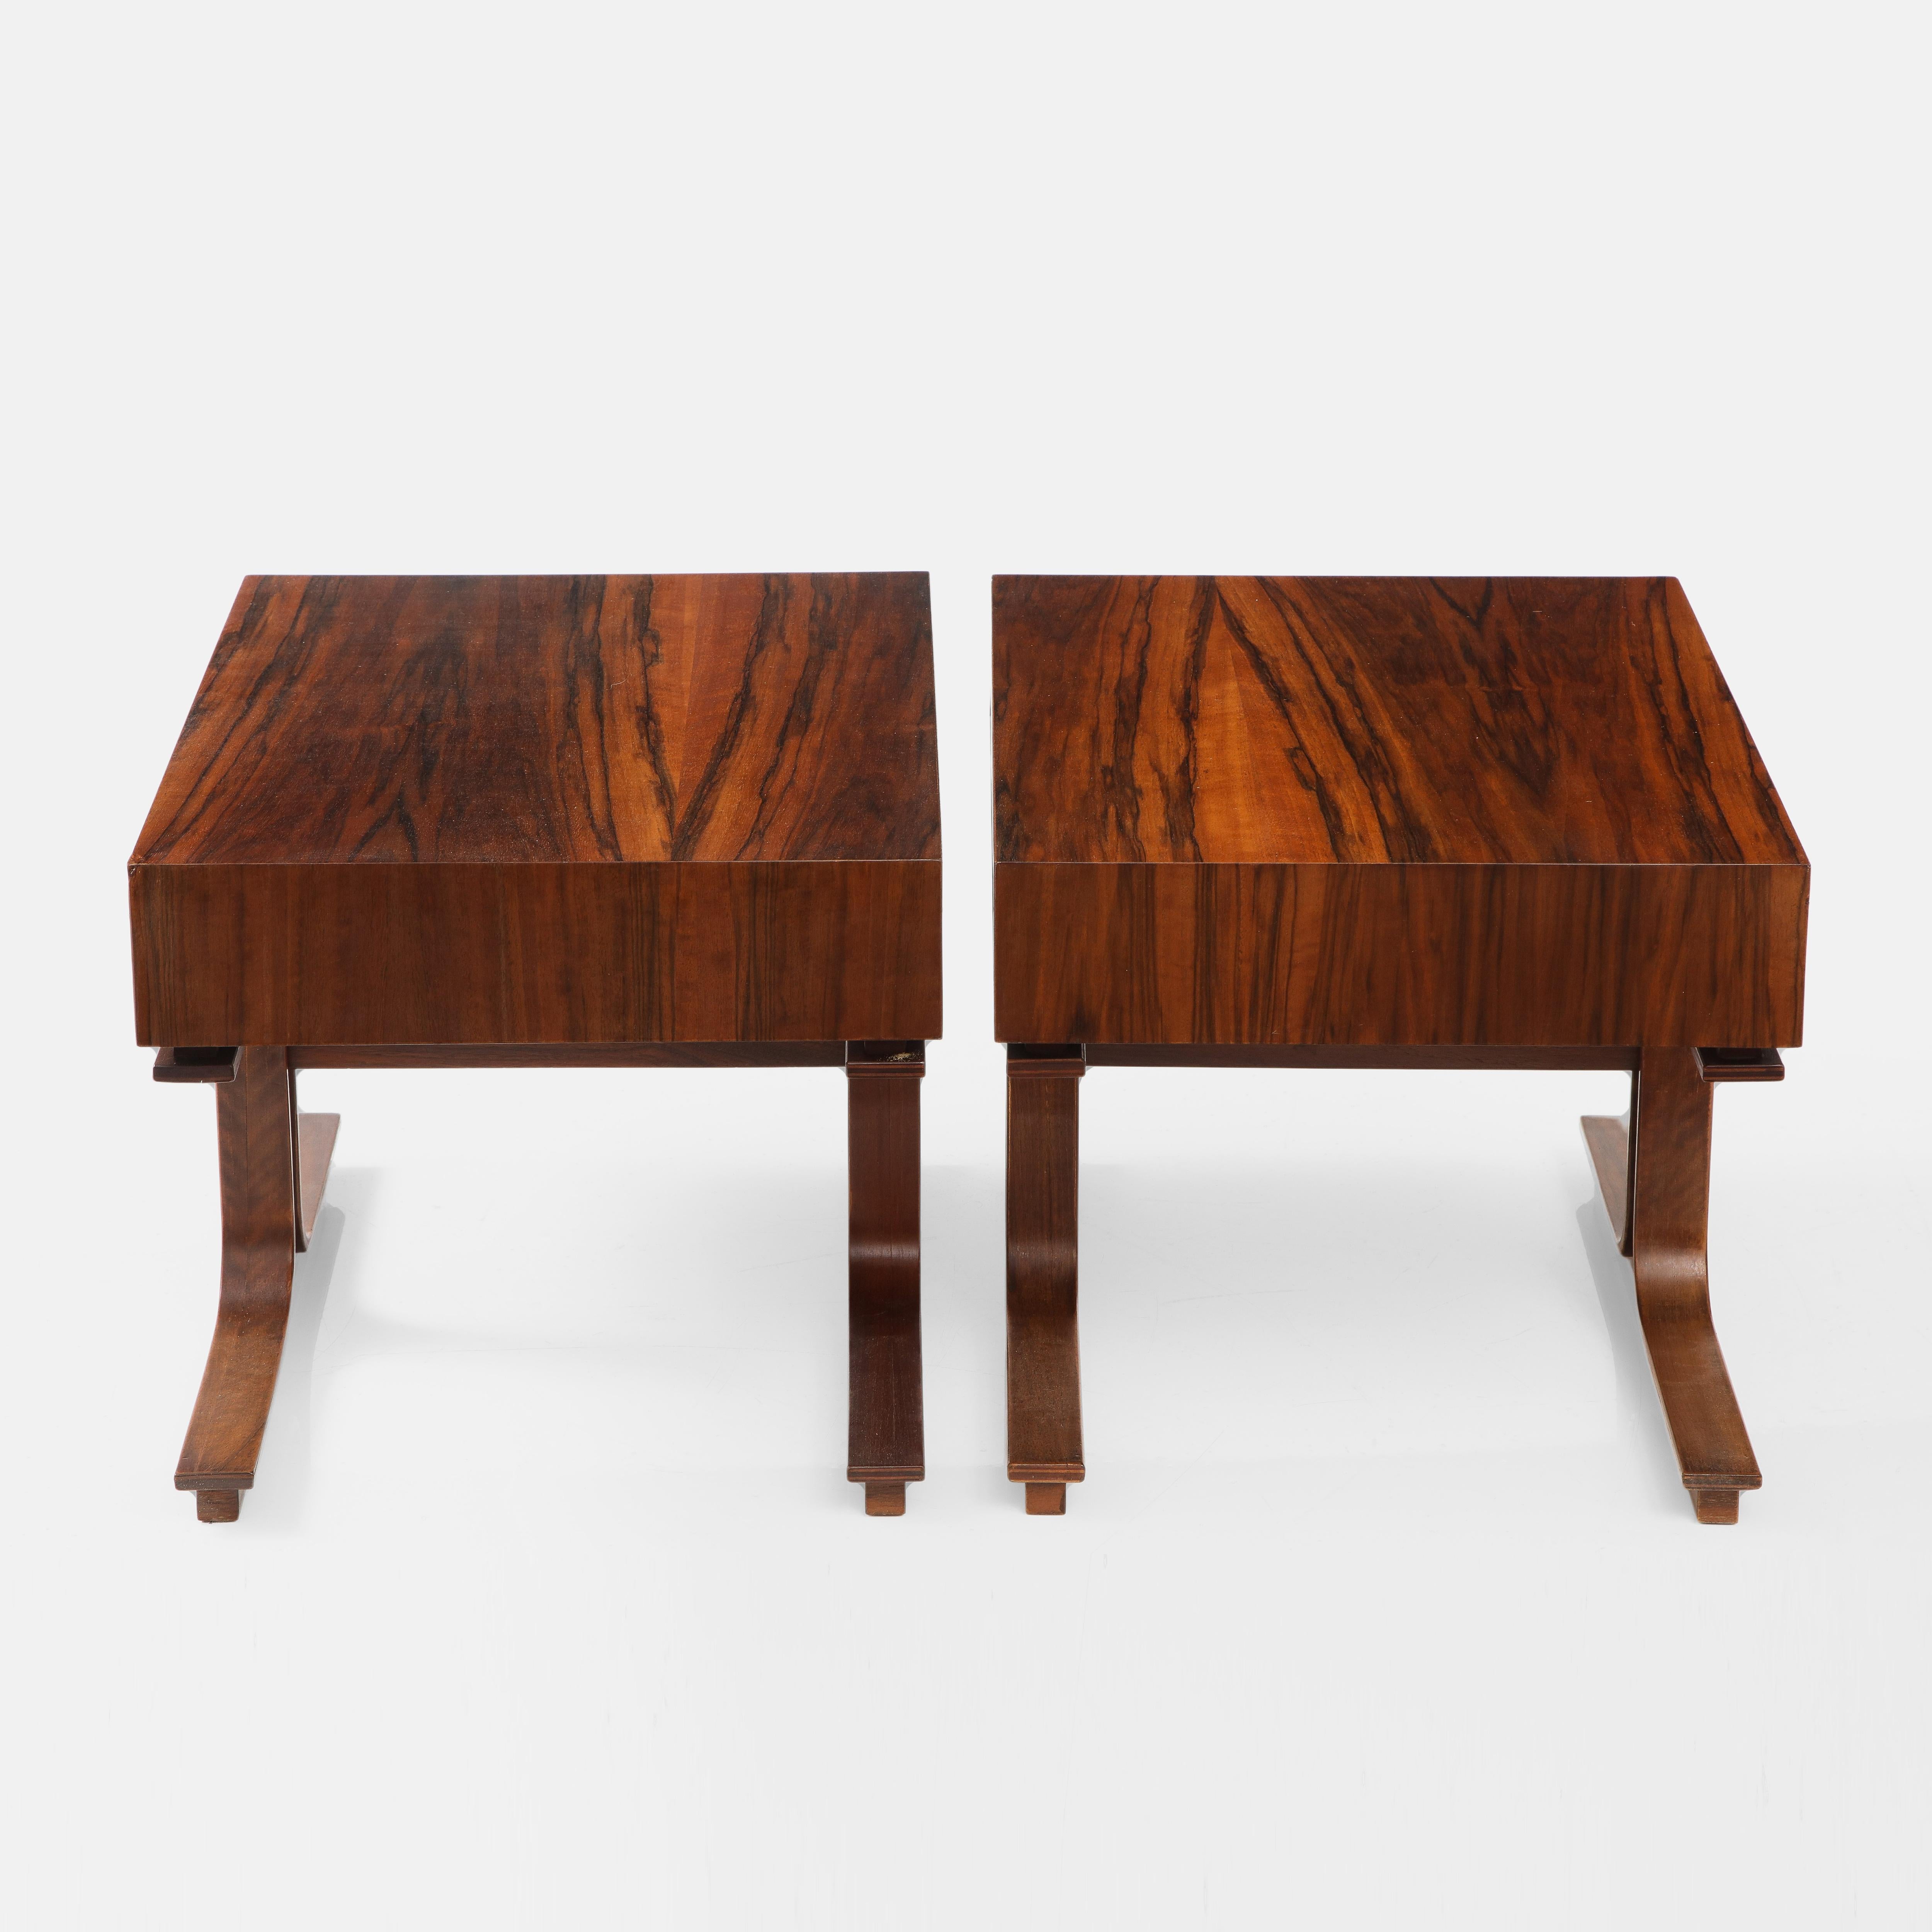 Mid-Century Modern Gianfranco Frattini for Bernini Pair of Rosewood Side or Bedside Tables, 1950s